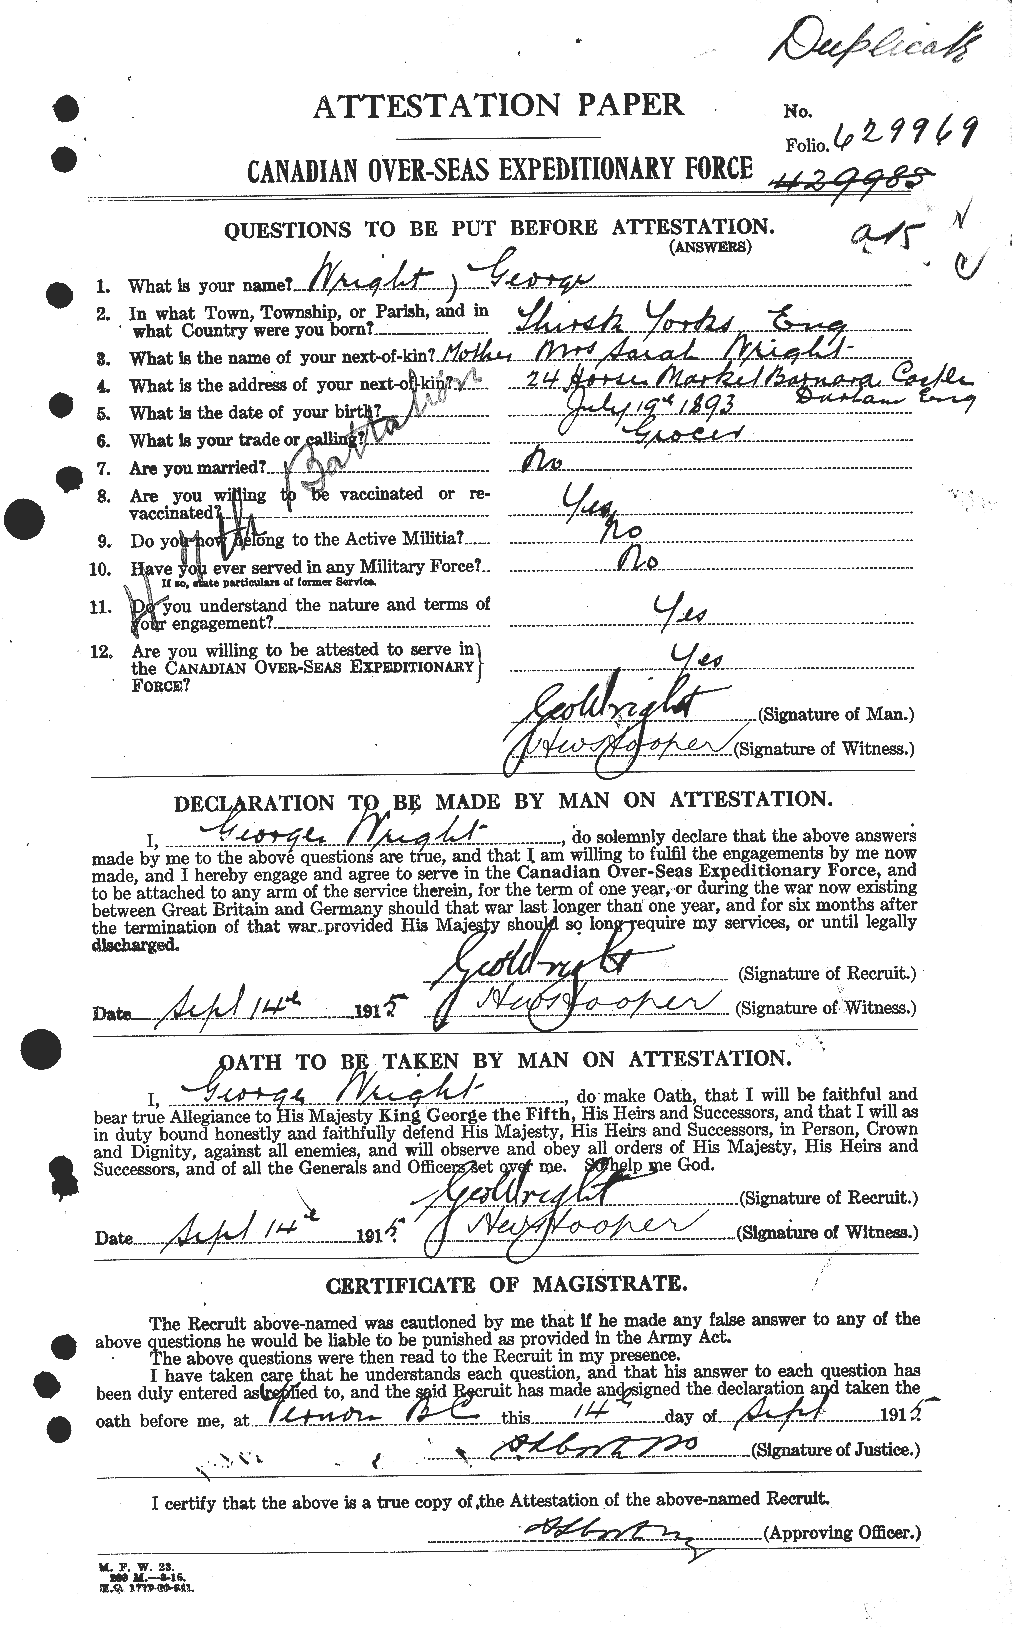 Personnel Records of the First World War - CEF 683987a